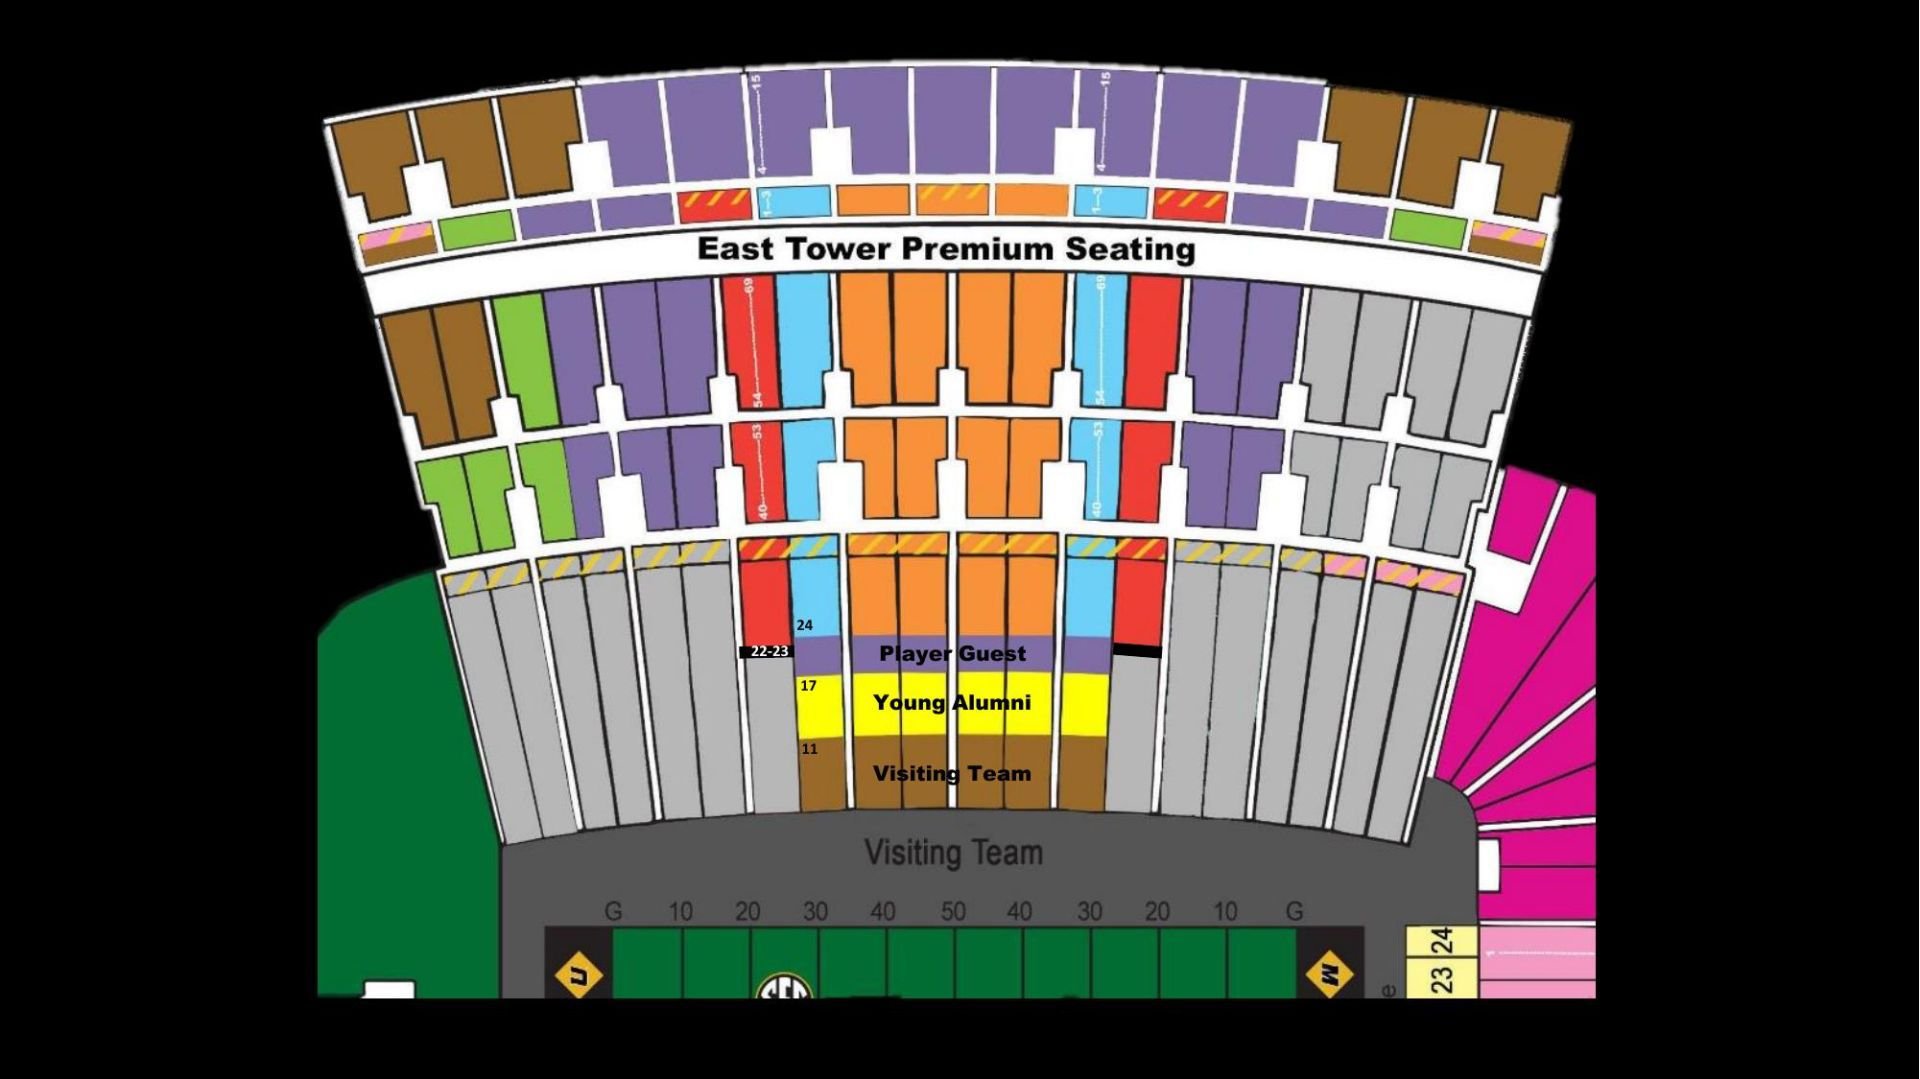 Faurot Field Seating Chart With Seat Numbers